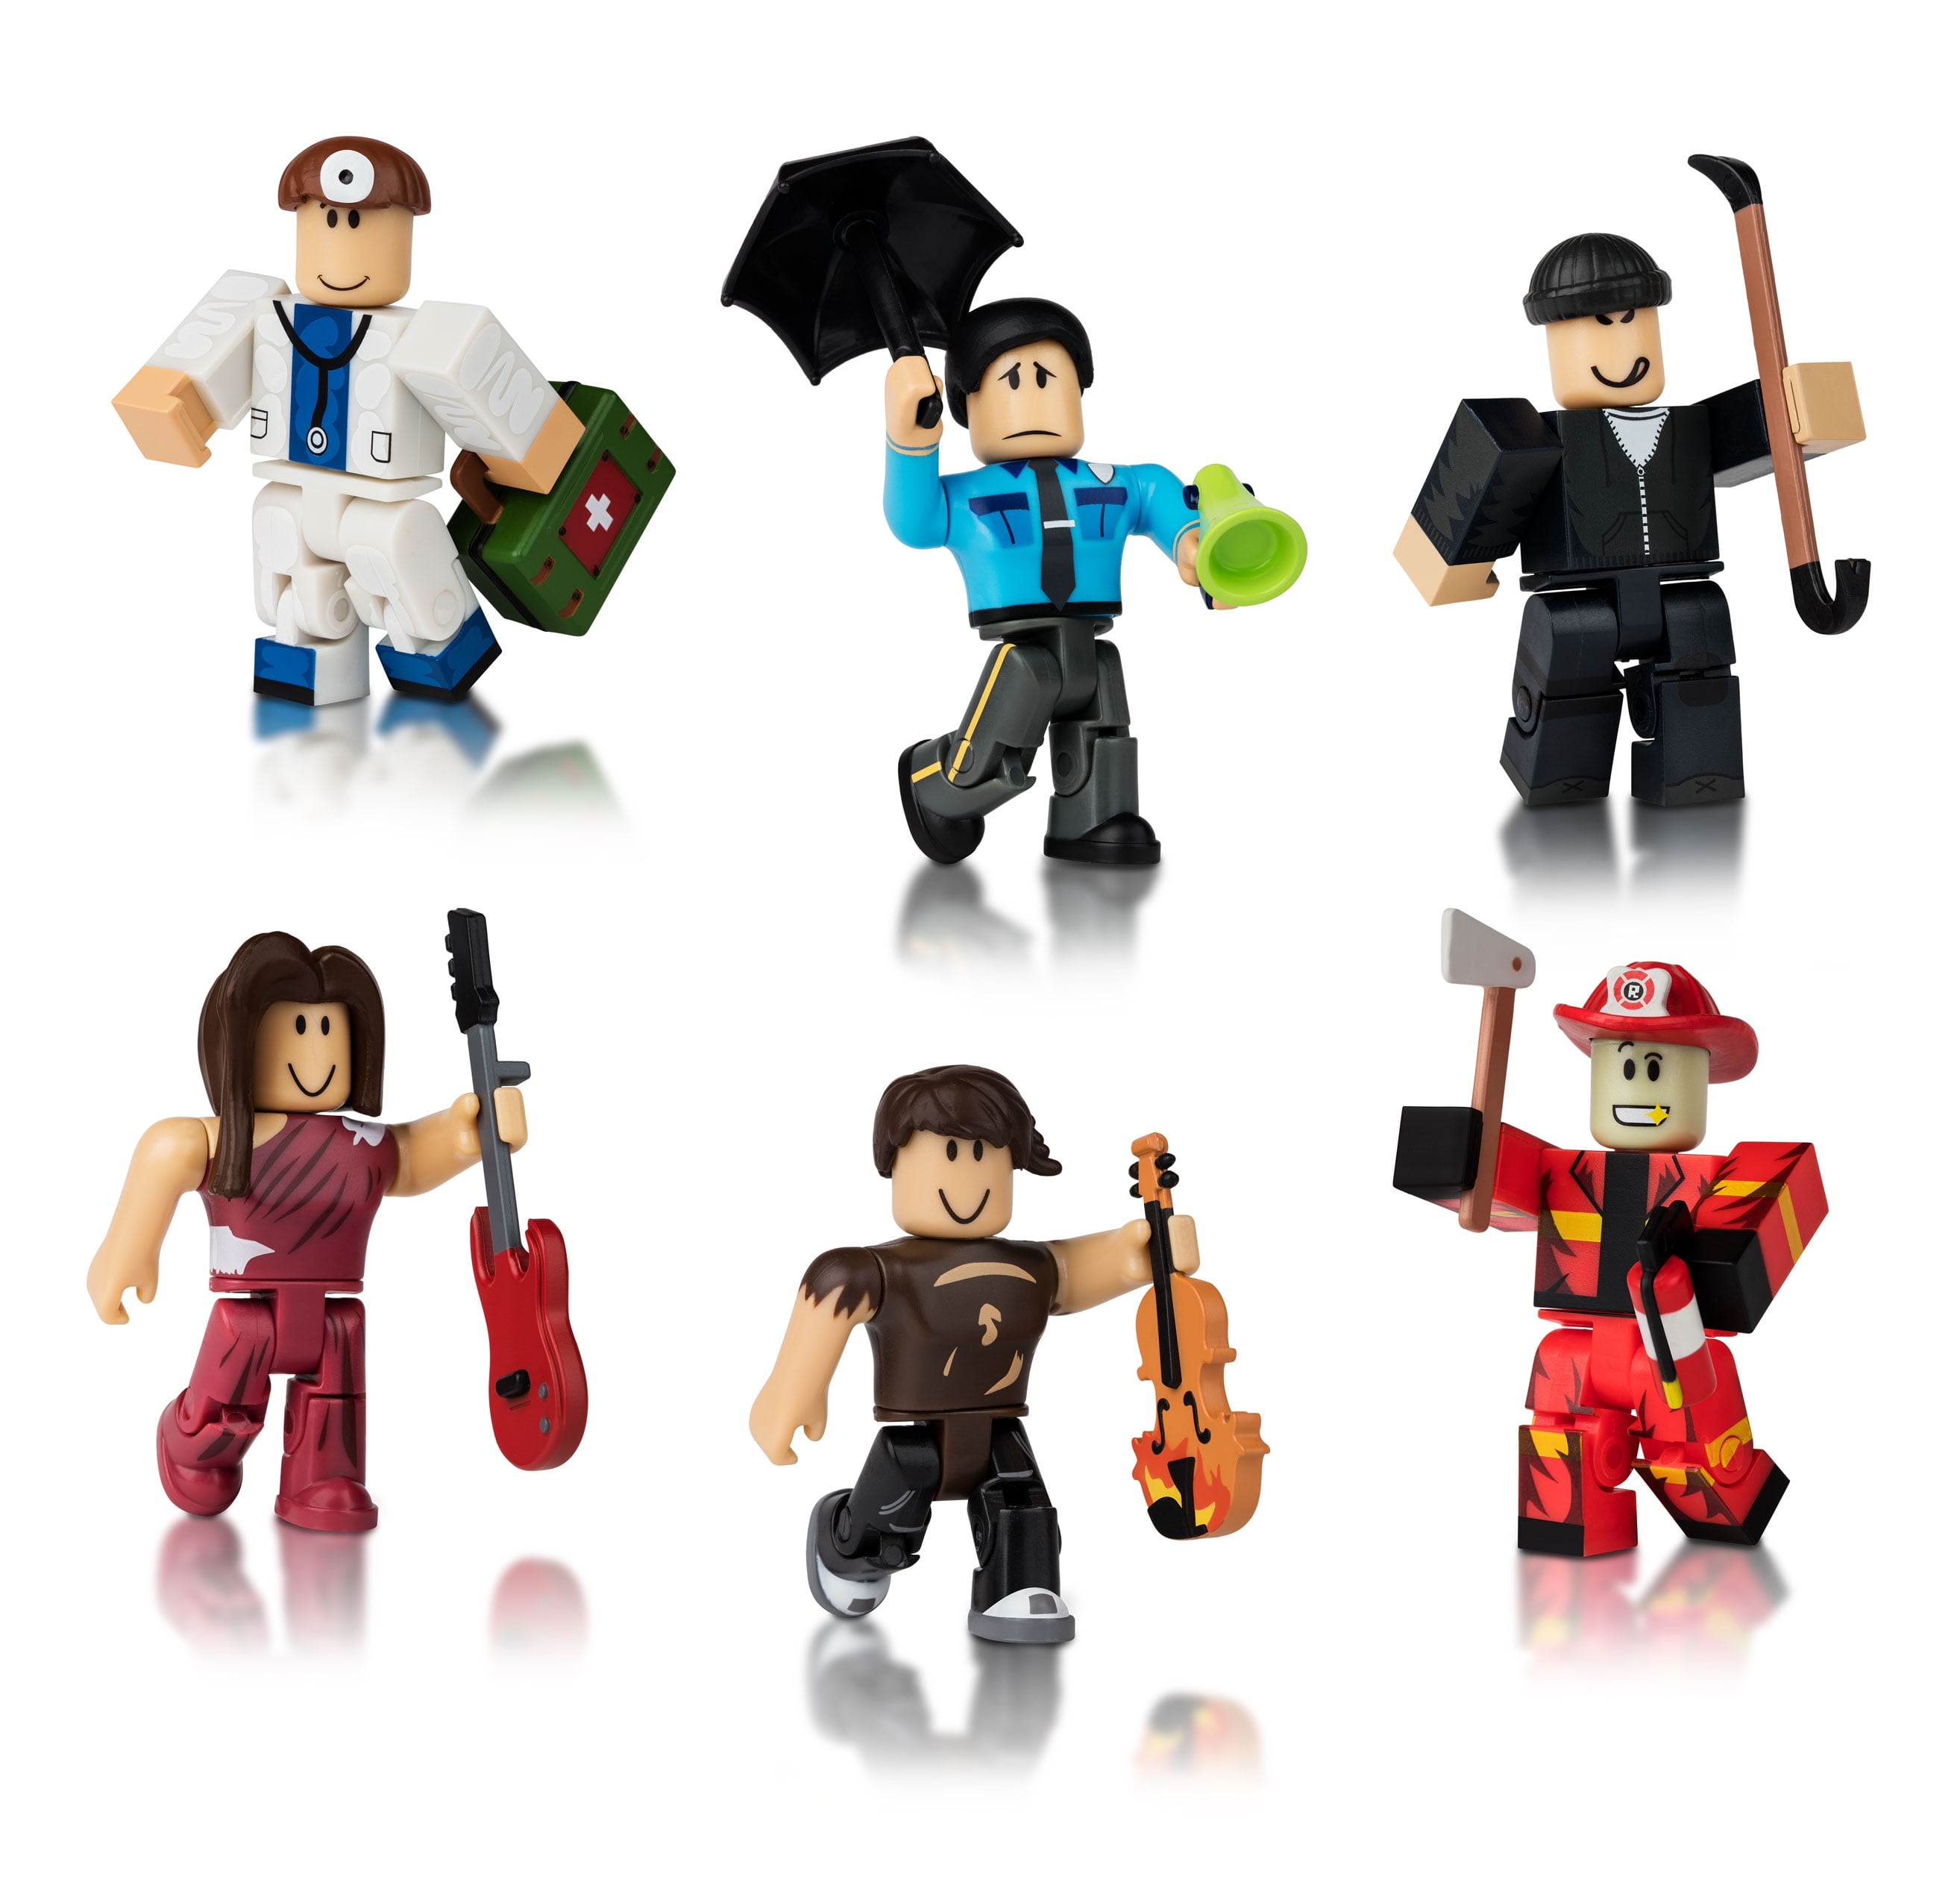 Roblox Action Collection Citizens Of Roblox Six Figure Pack Includes Exclusive Virtual Item Walmart Com Walmart Com - custom roblox action figures